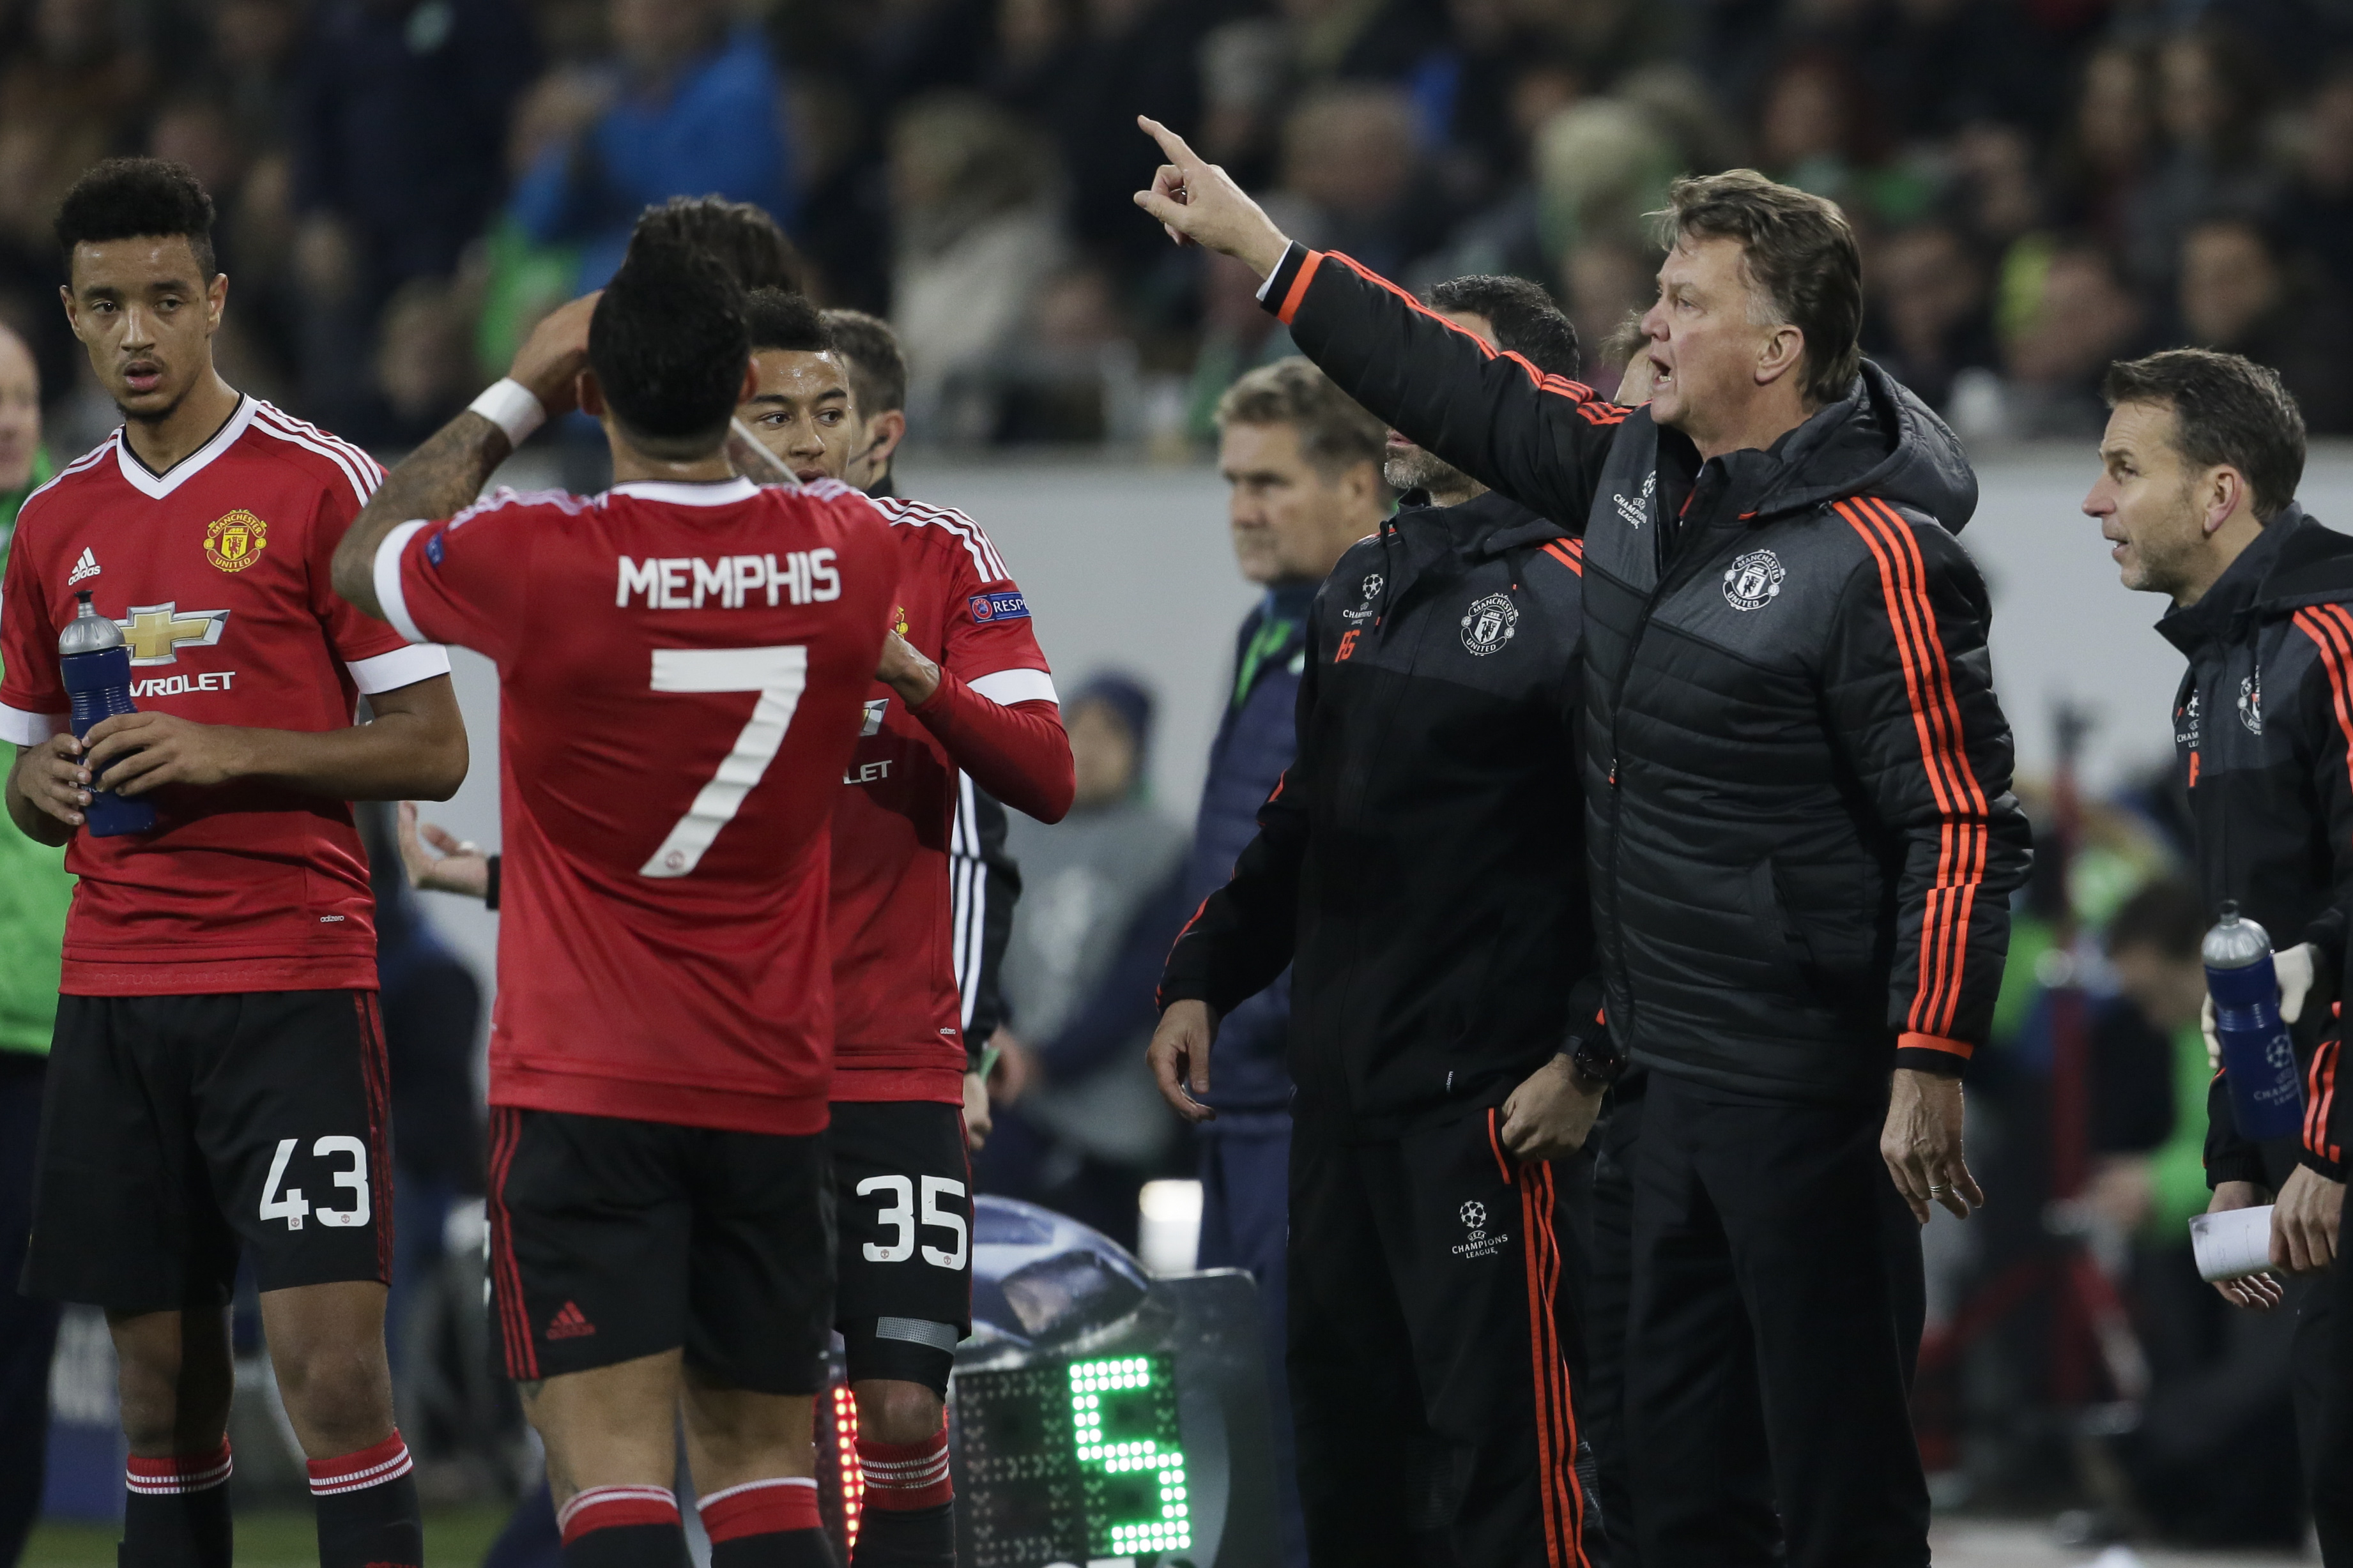 Manchester United's manager Louis van Gaal, 2nd from right, gestures to players during the Champions League group B soccer match between VfL Wolfsburg and Manchester United in Wolfsburg, Germany, Tuesday, Dec. 8, 2015. (AP Photo/Markus Schreiber)